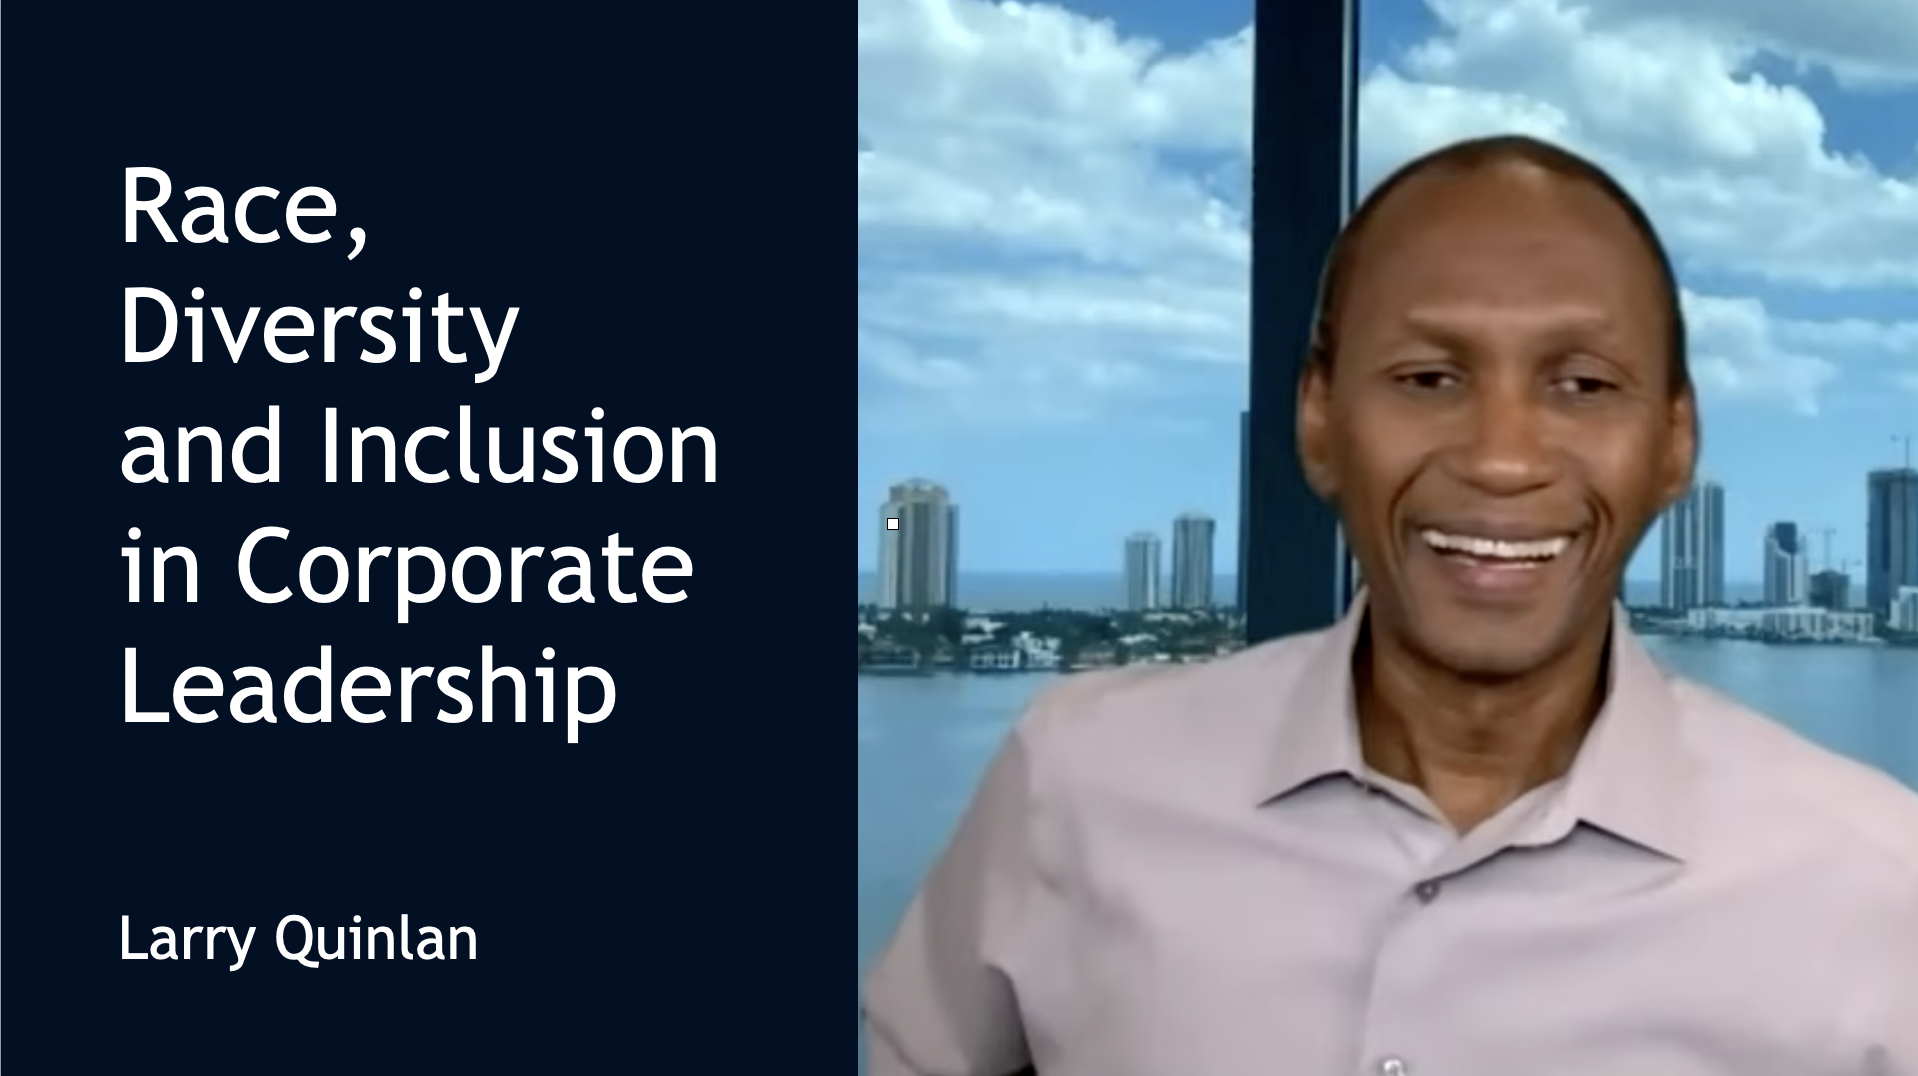 Discussing Race, Diversity, and Inclusion in Corporate Leadership